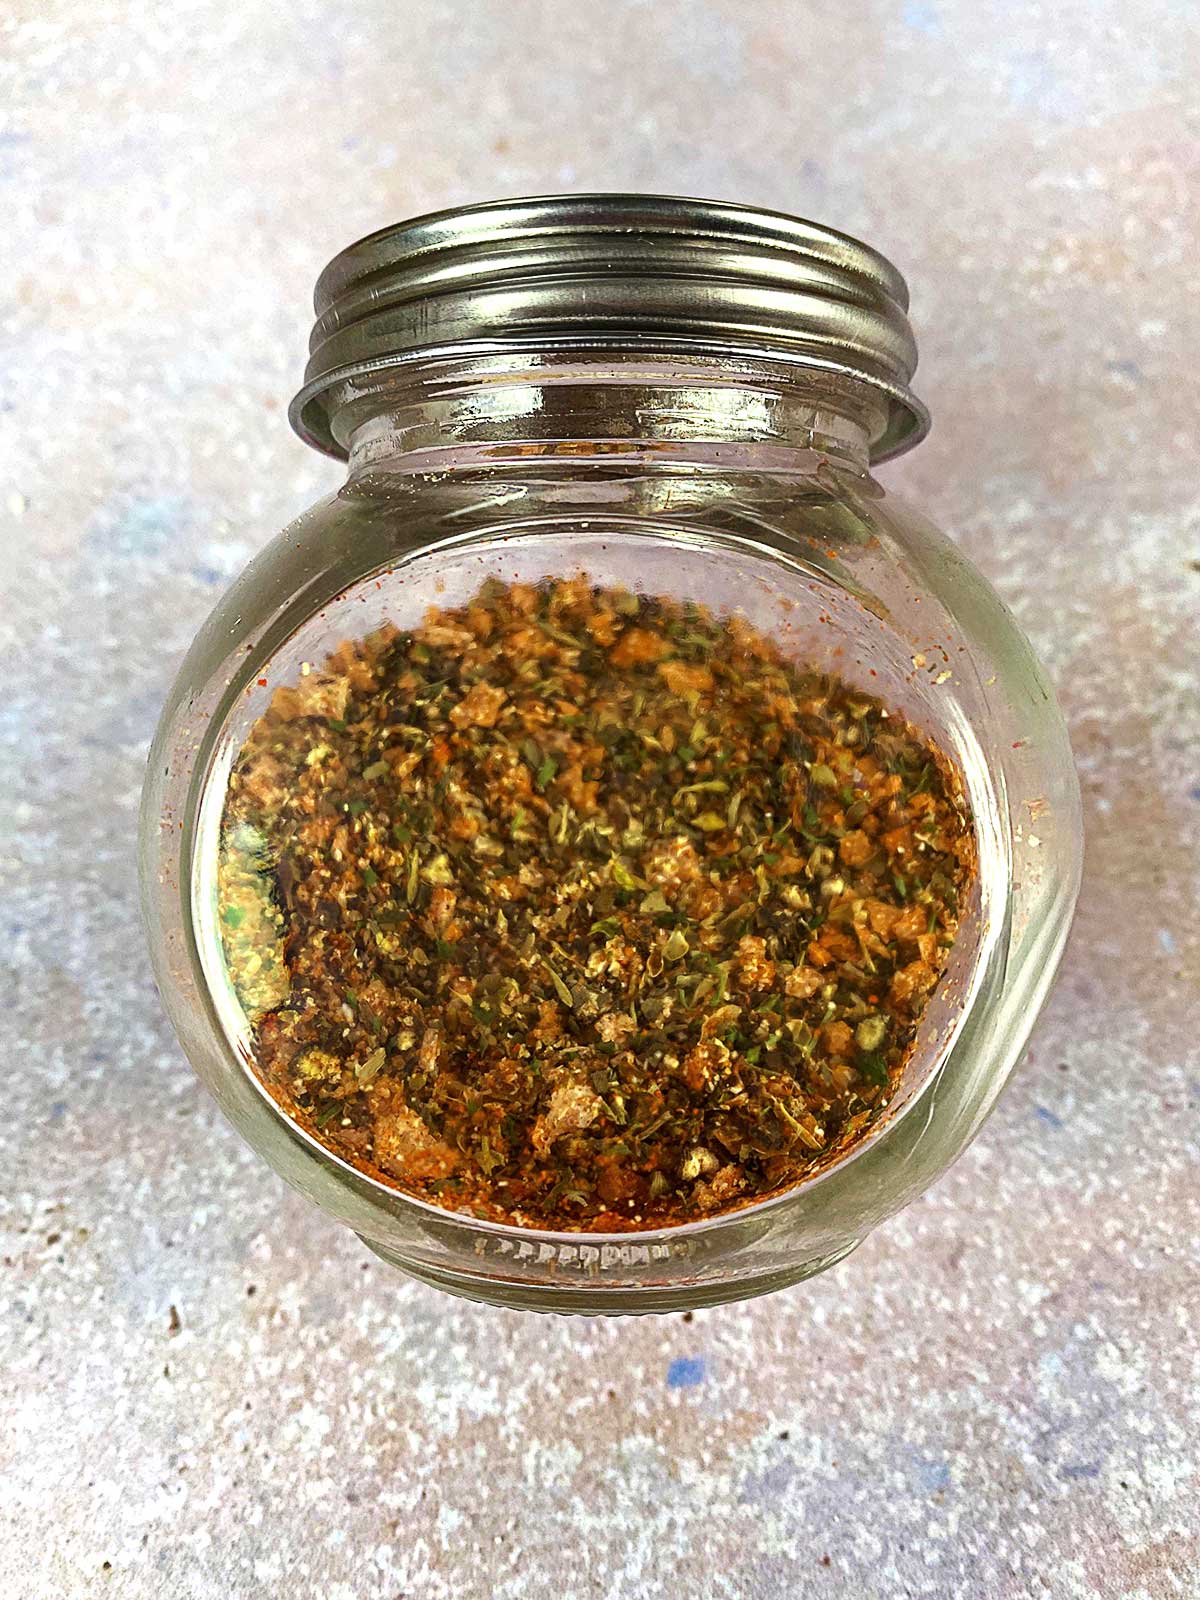 A glass jar full of mixed herbs and spices.